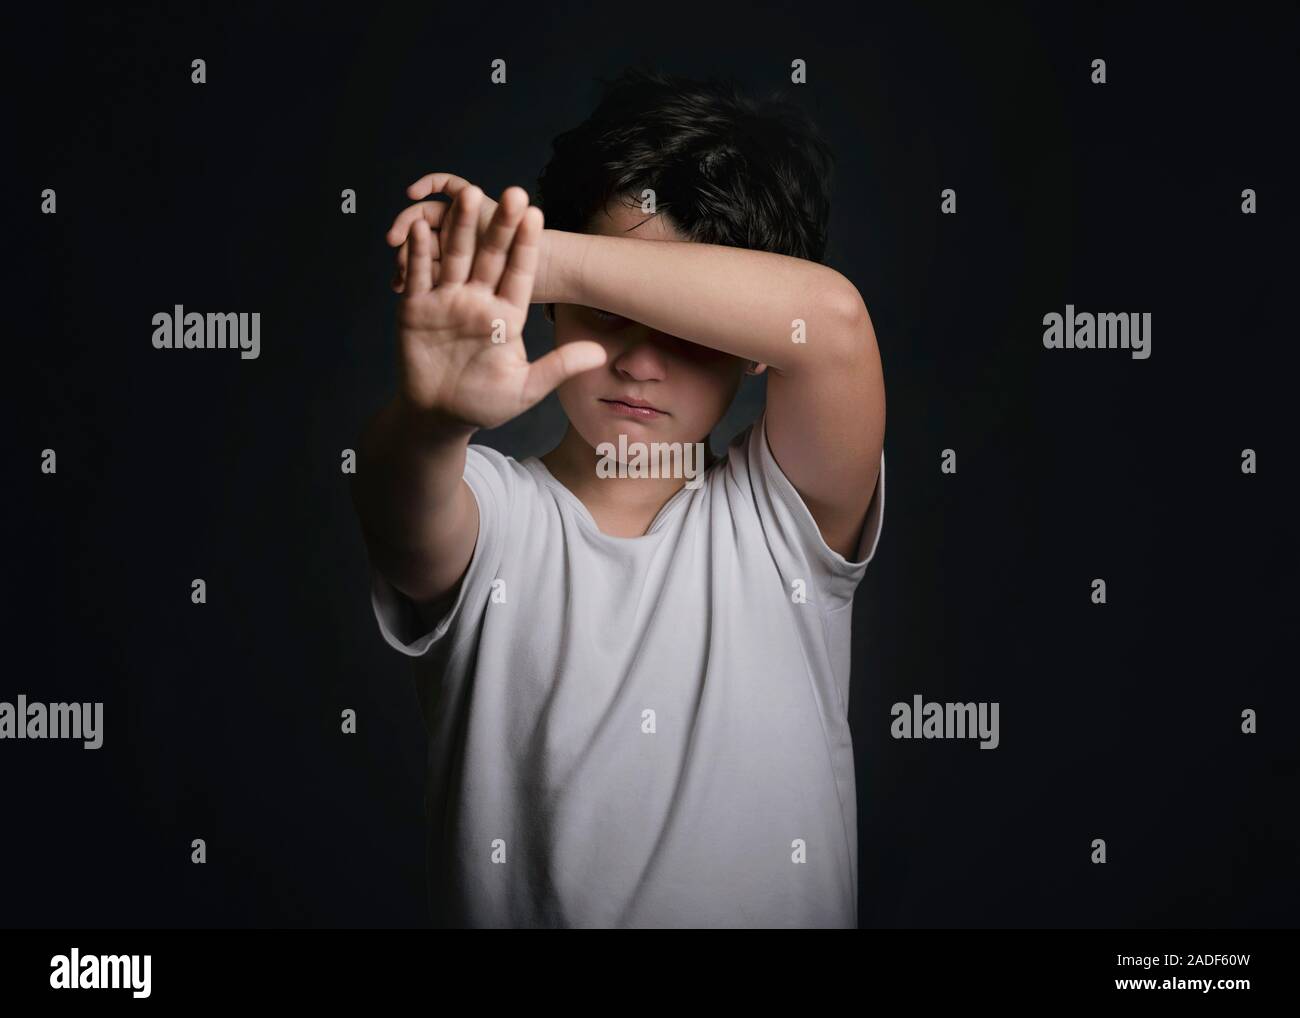 crying child showing a stop sign on black background Stock Photo